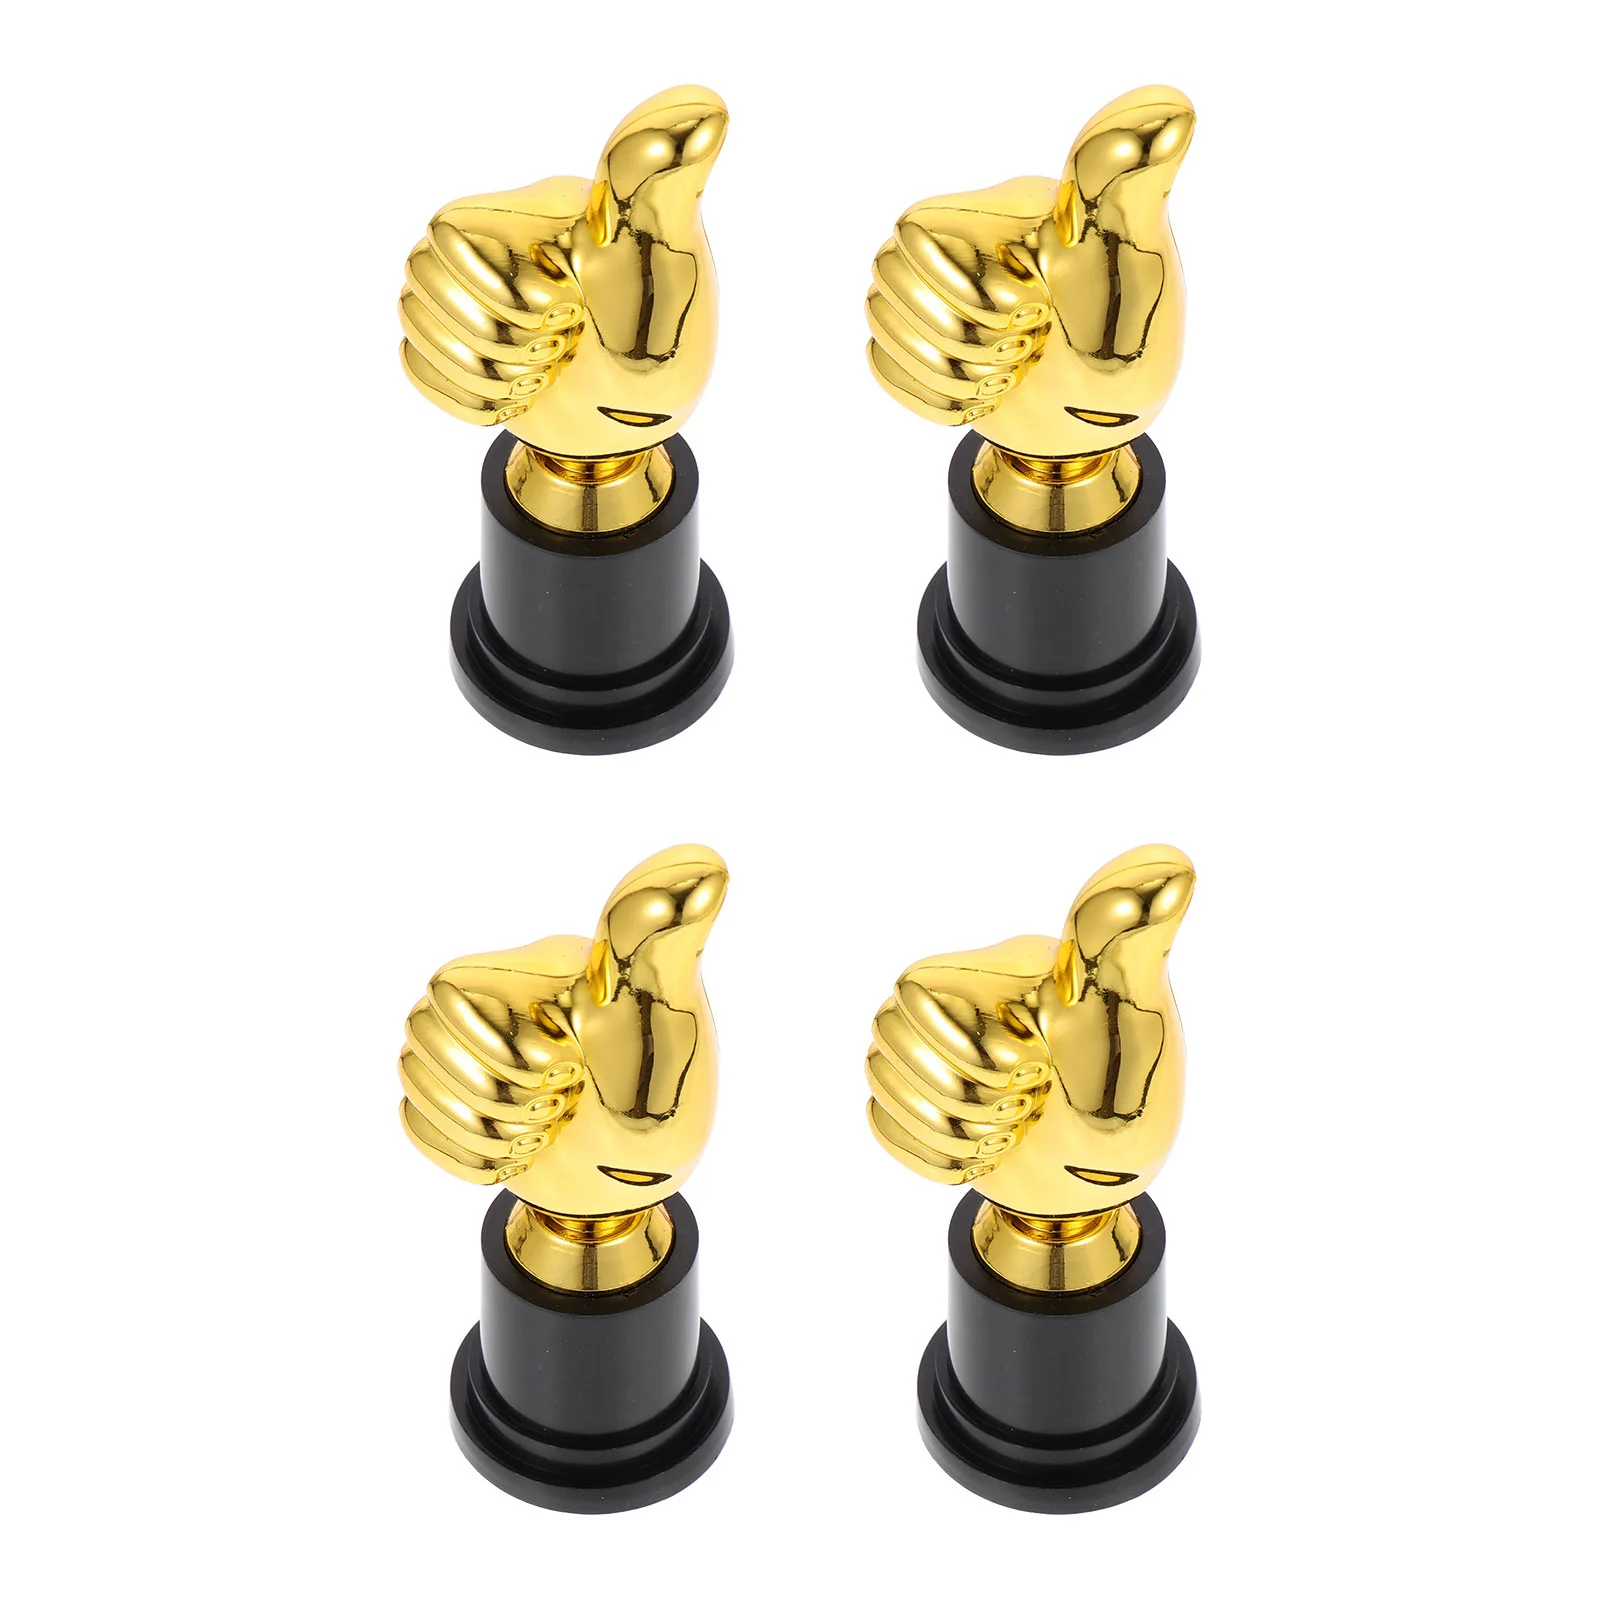 Great Thumb Plastic Trophy Delicate Sports Game Commemorative Trophies School Rewarding Trophies Show Competition Gifts